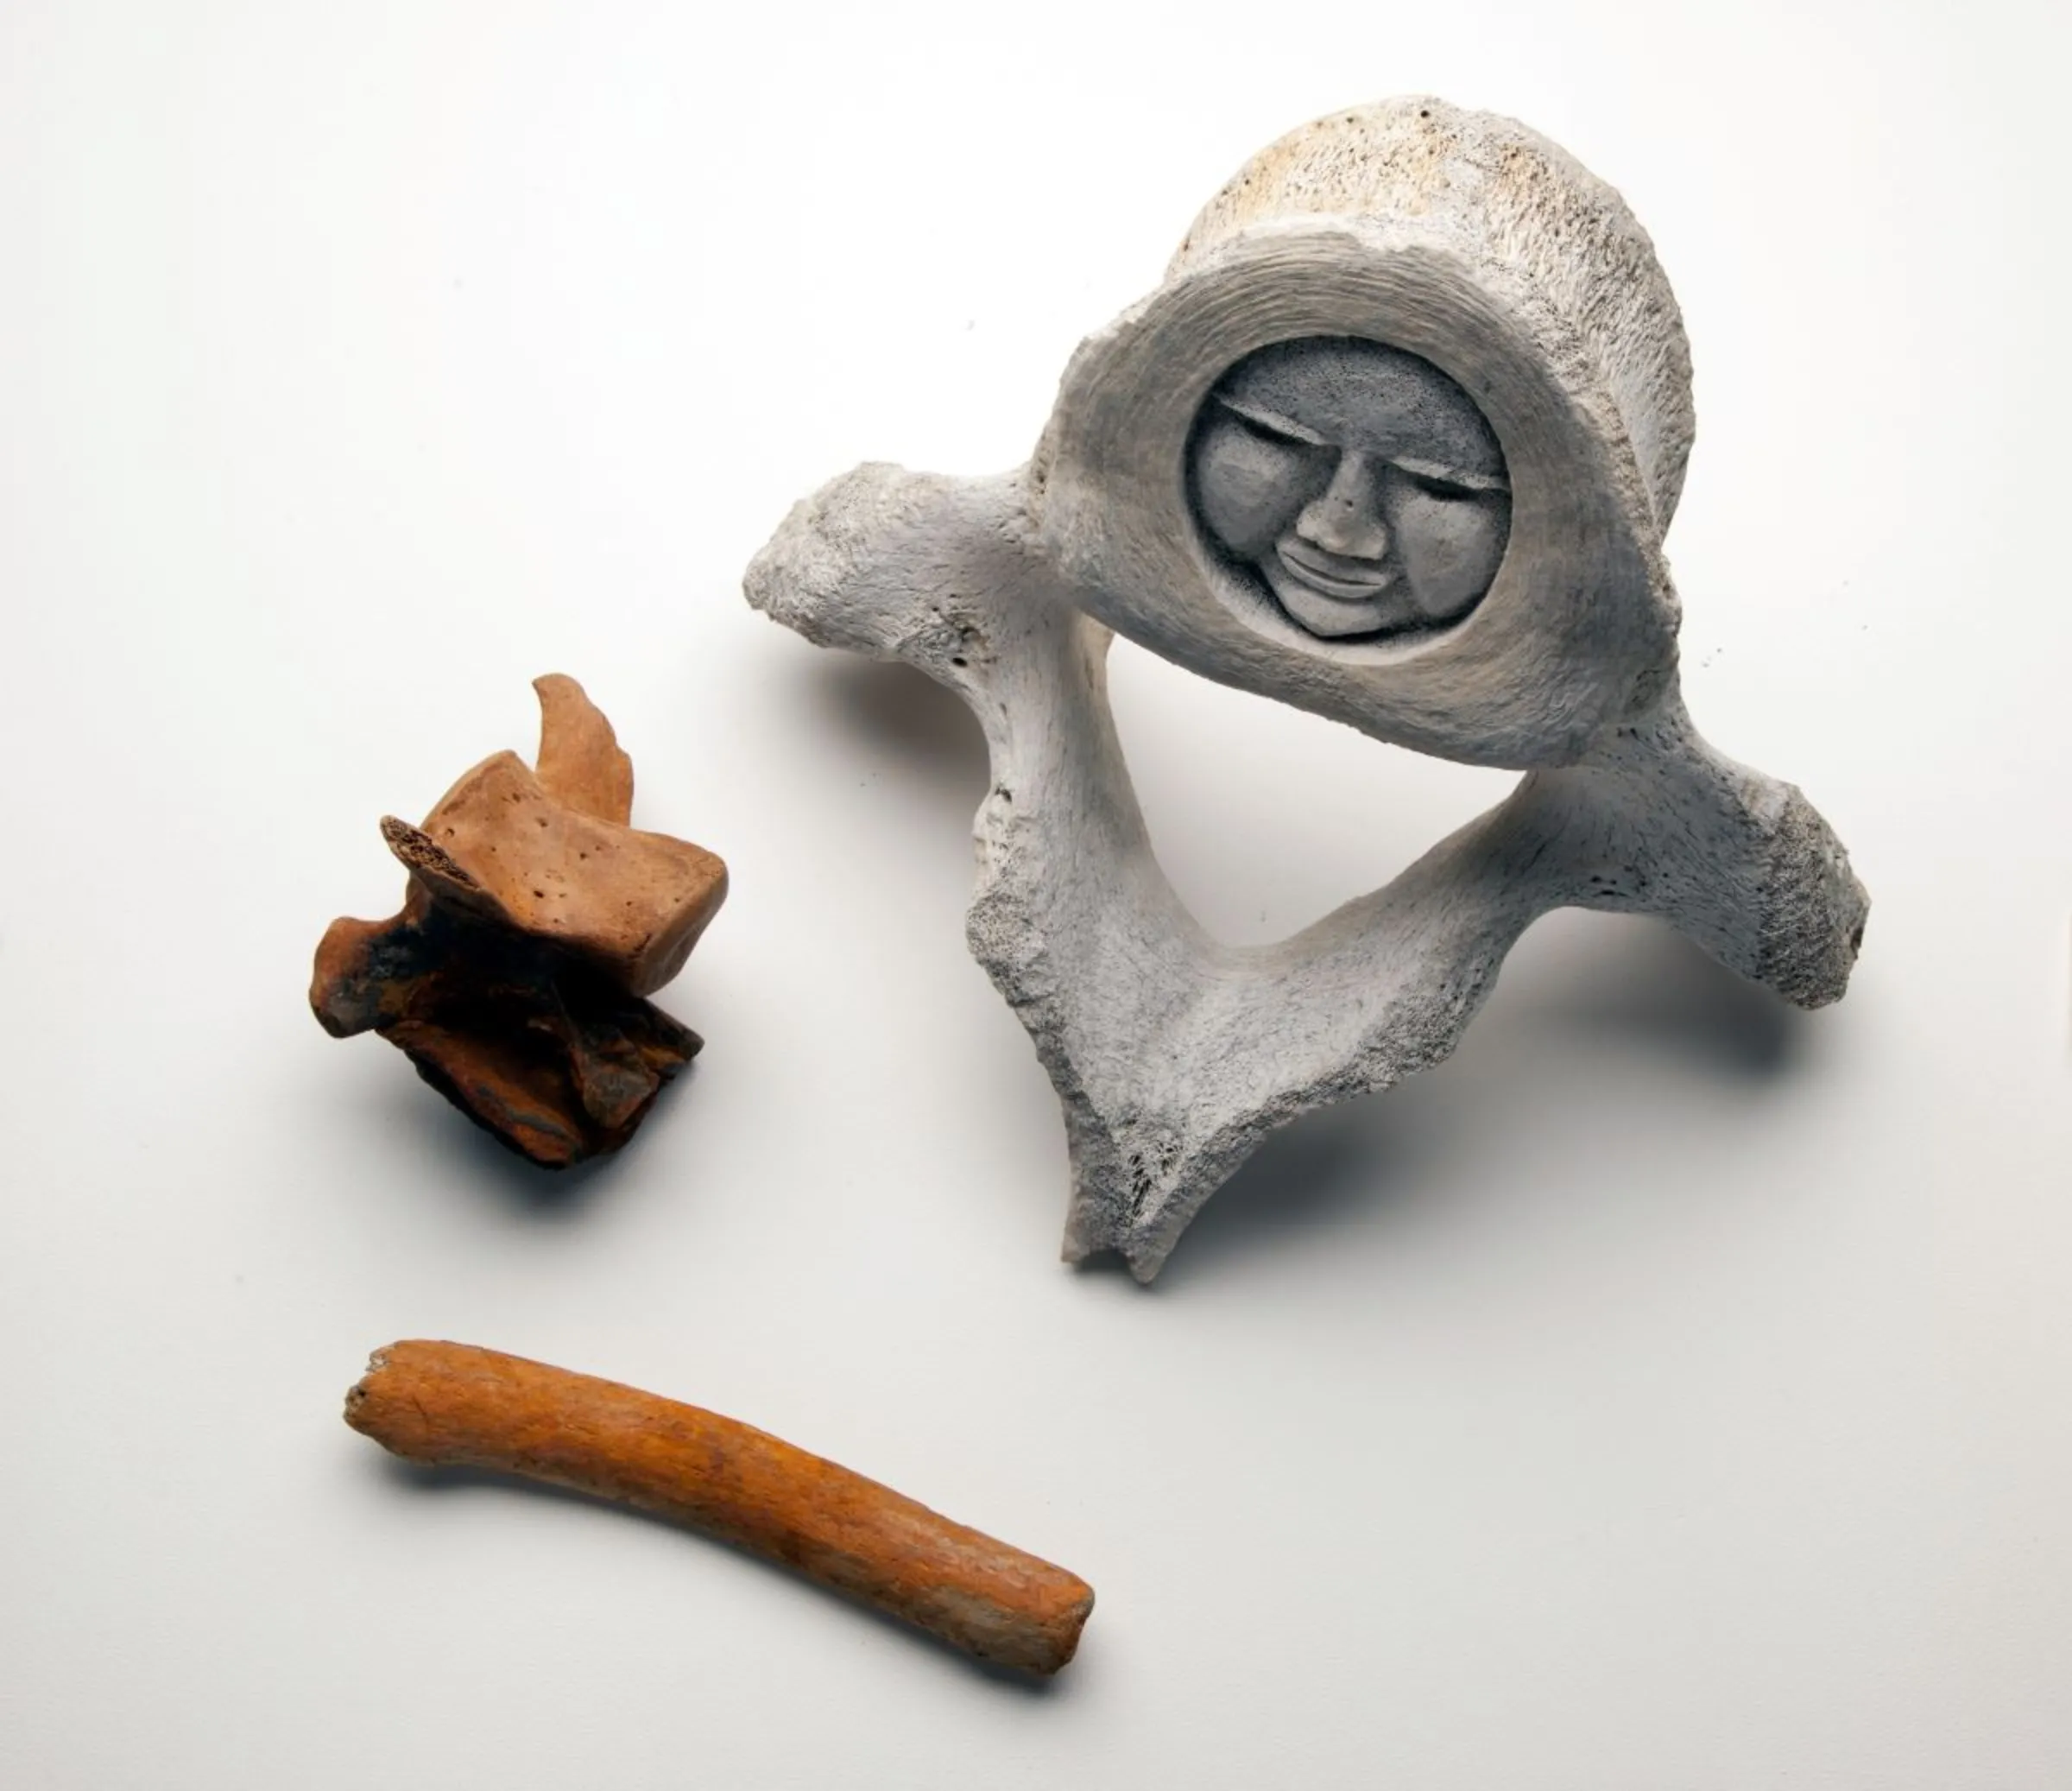 Objects contributed by people in places affected by climate change impacts that are a part of the Kivalina, Alaska (USA) Collection in American artist Amy Balkin’s People's Archive of Sinking and Melting. Mary Lou Saxon Handout via Thomson Reuters Foundation